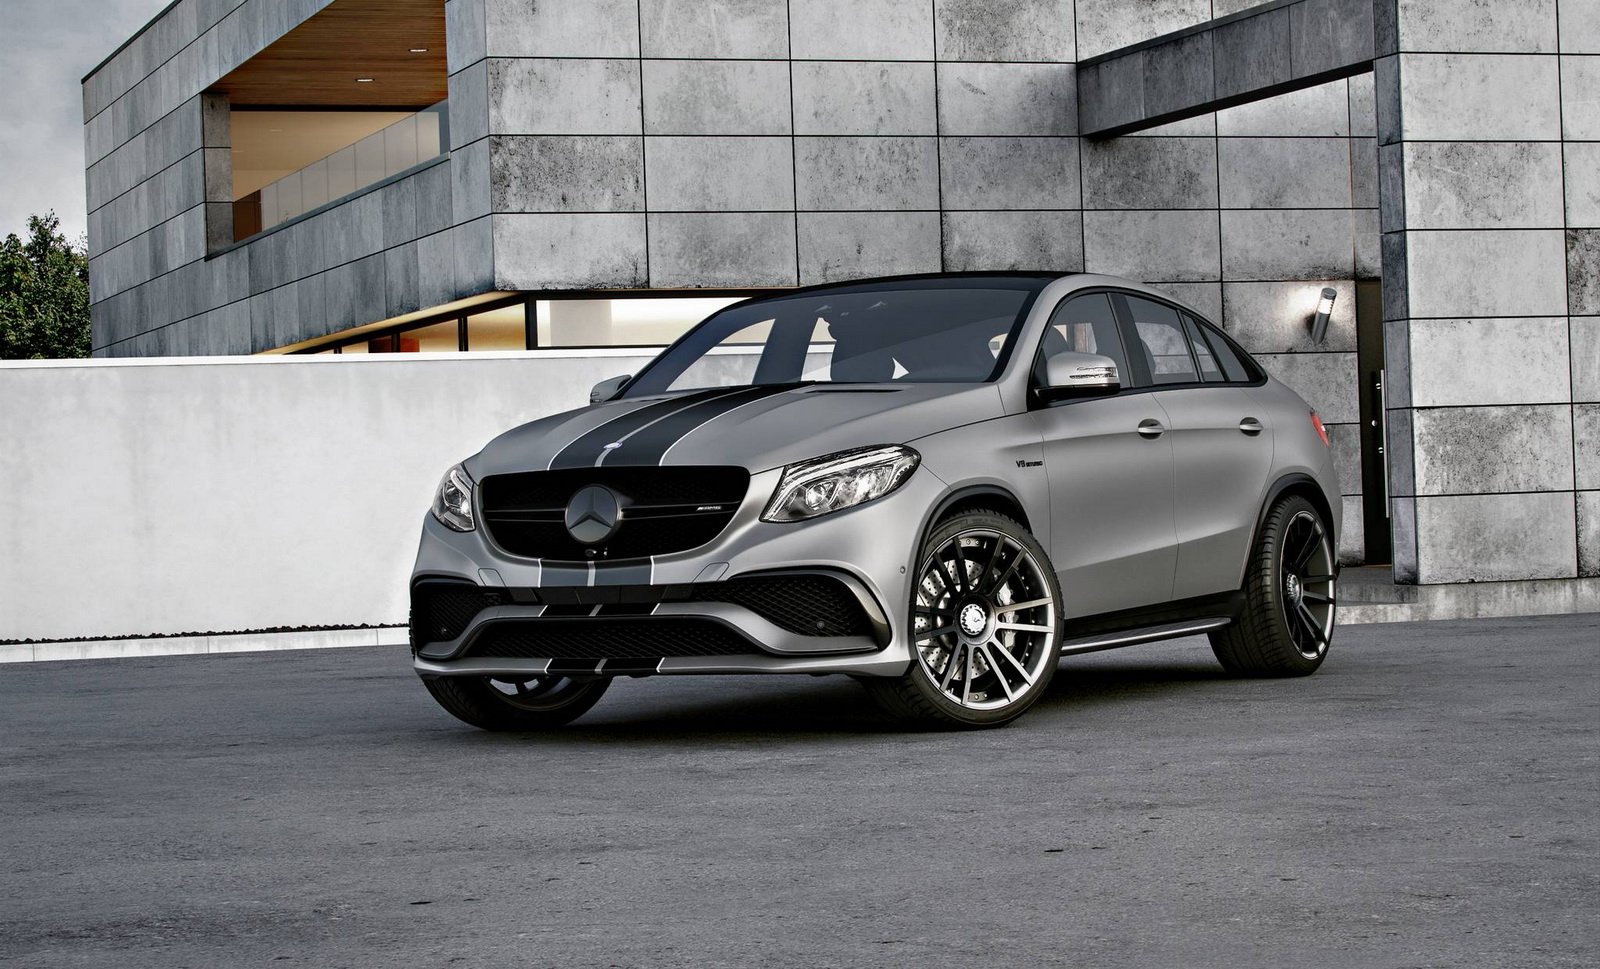 2016, Wheelsandmore, Mercedes, Amg, Gle 63, Coupe, Cars, Modified Wallpaper